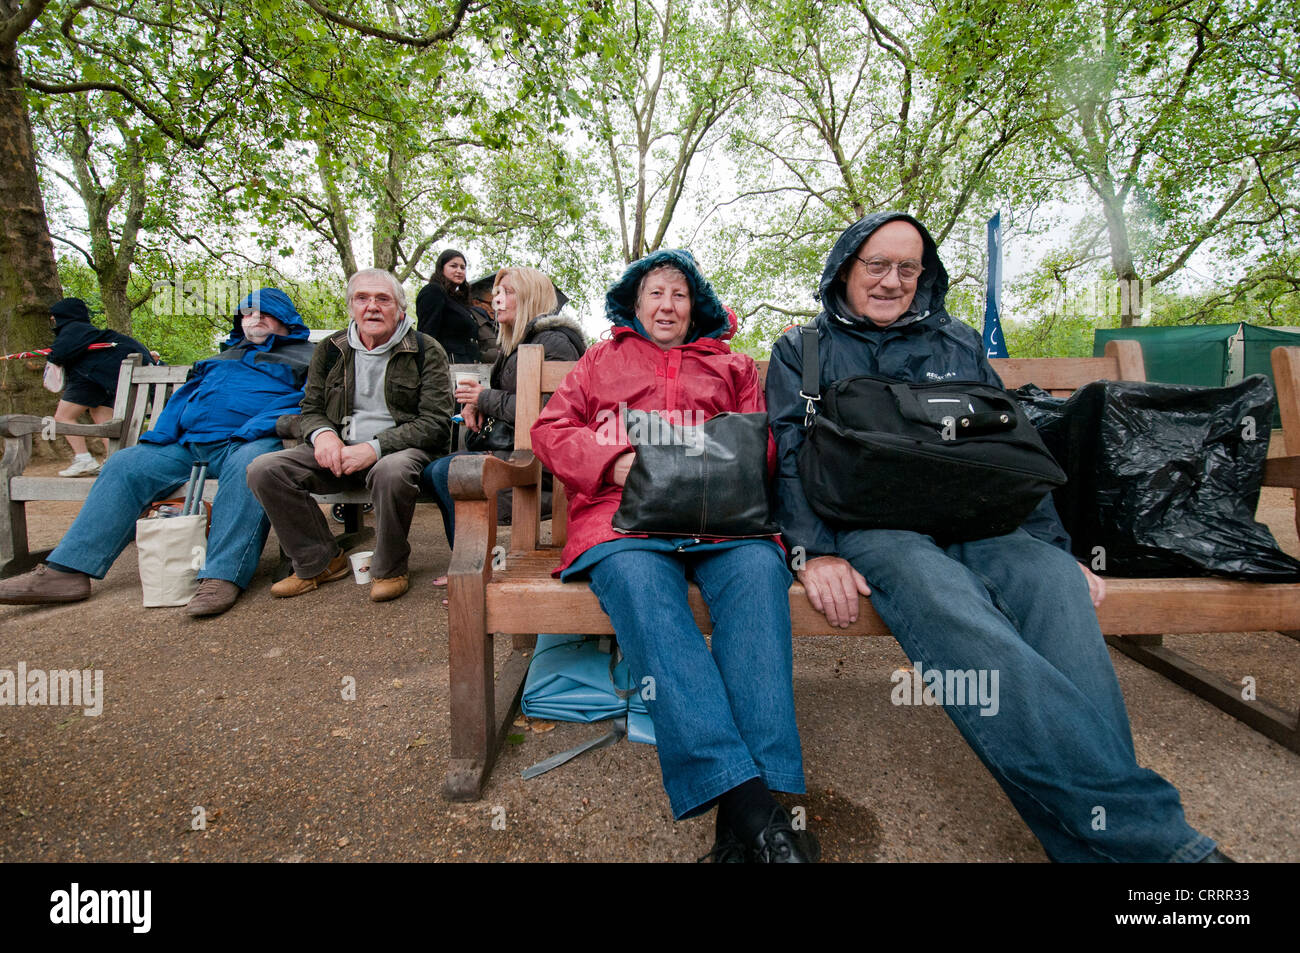 Middle-aged people sitting on benches in the park rainy weather Stock Photo